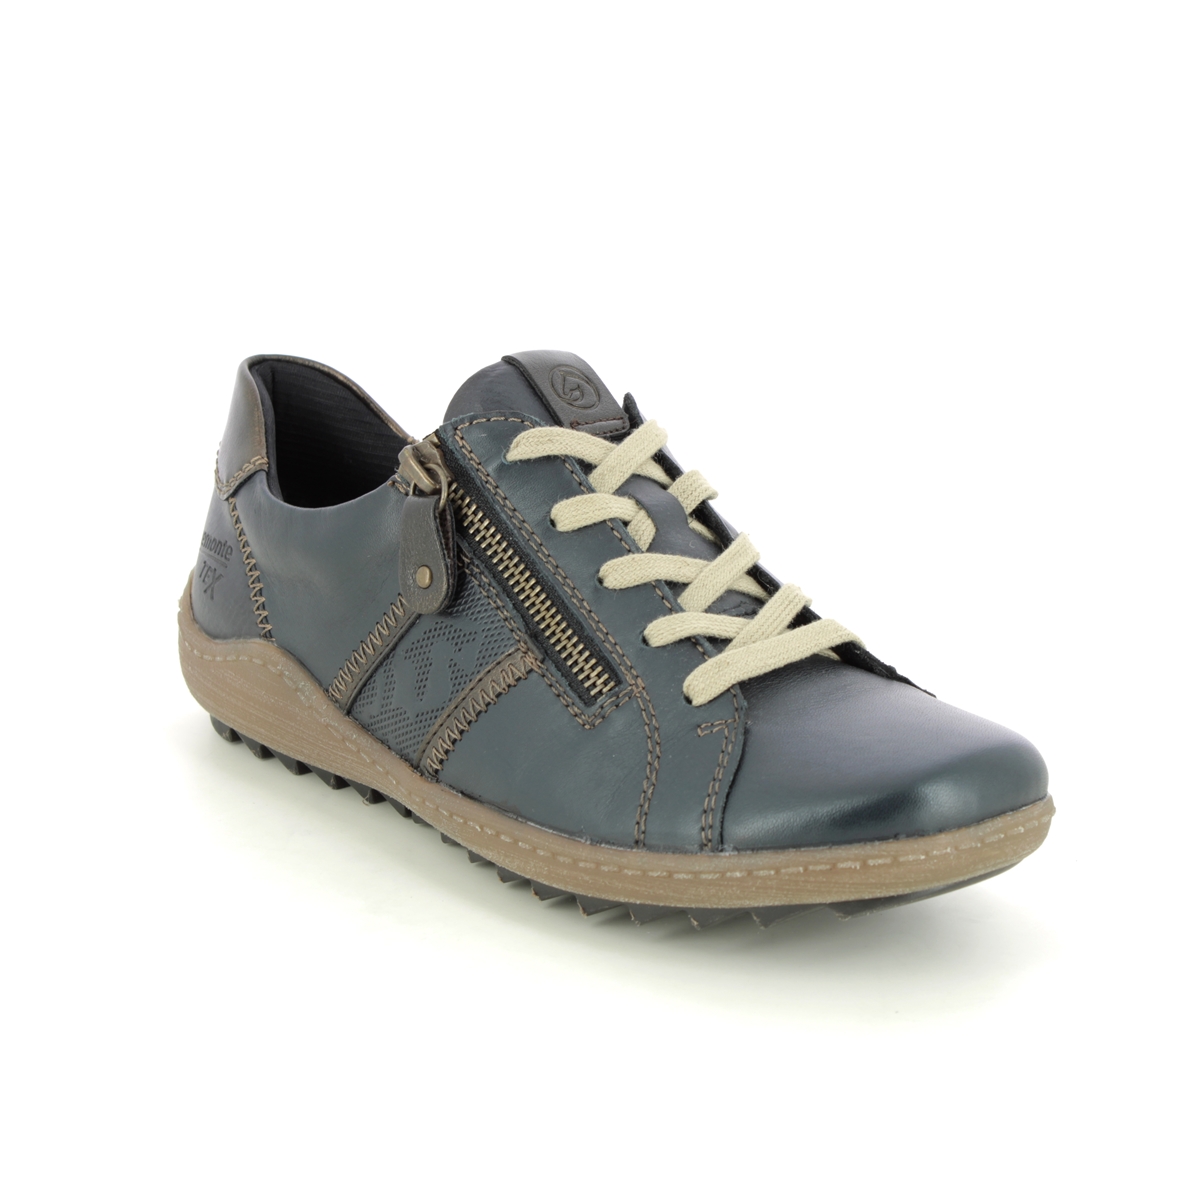 Remonte Zigspo Tex 15 Navy Leather Womens Lacing Shoes R1426-15 In Size 42 In Plain Navy Leather